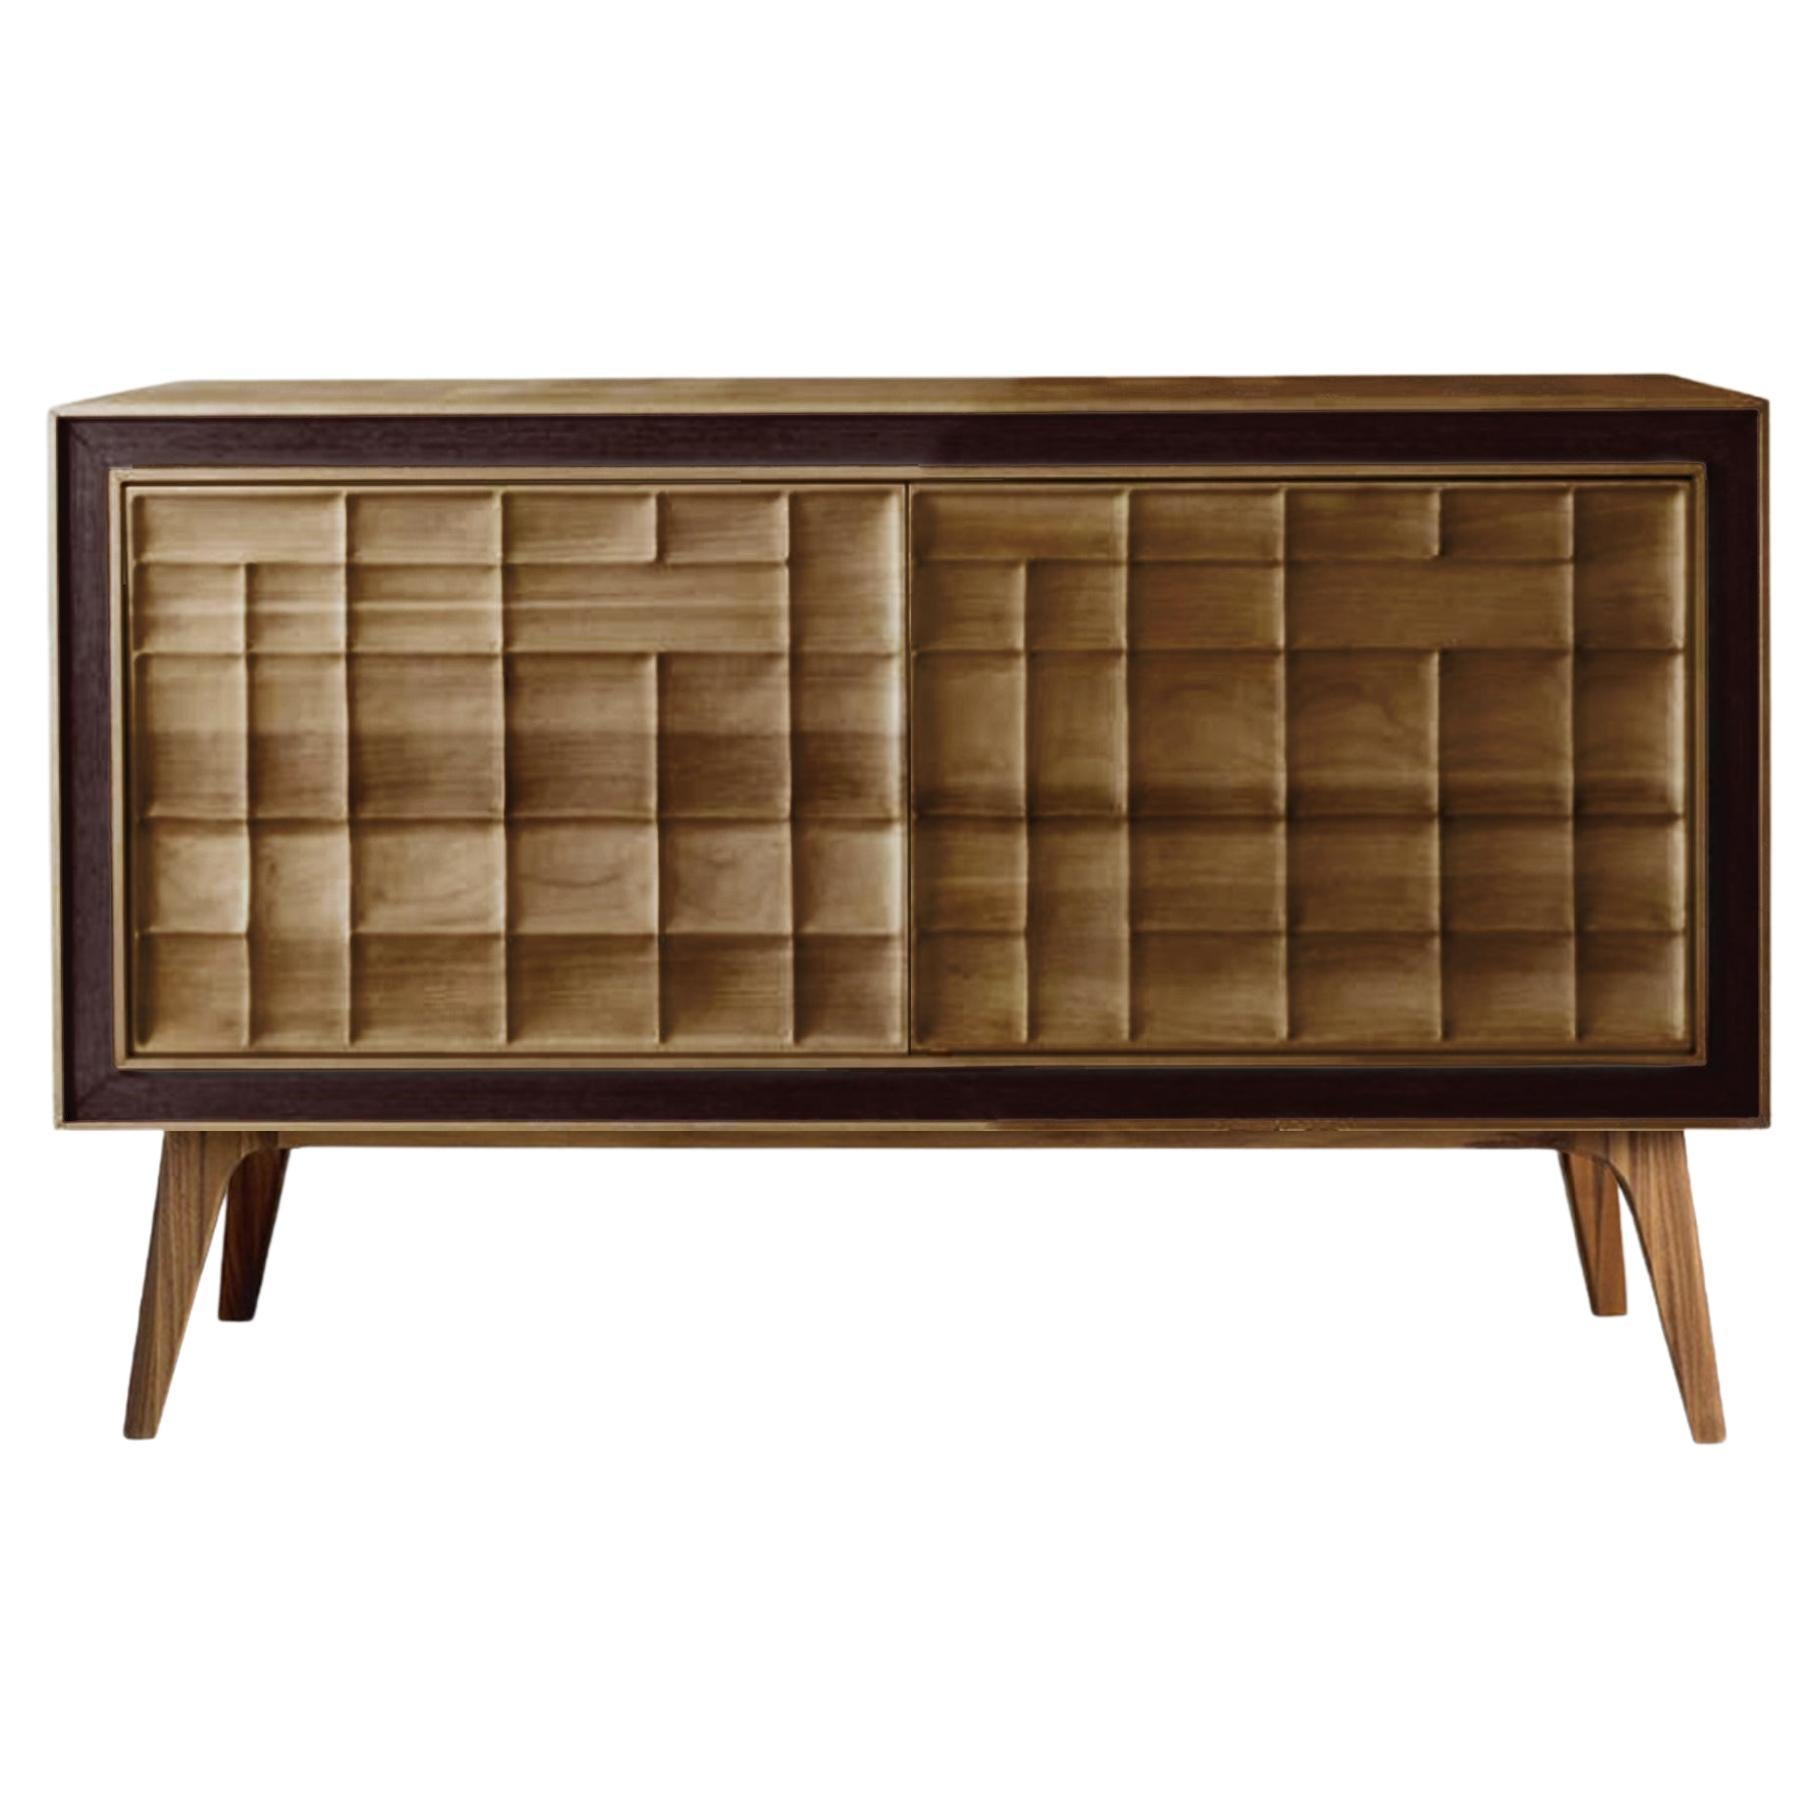 Quadra Scacco Solid Wood Sideboard, Walnut in Natural Finish, Contemporary For Sale